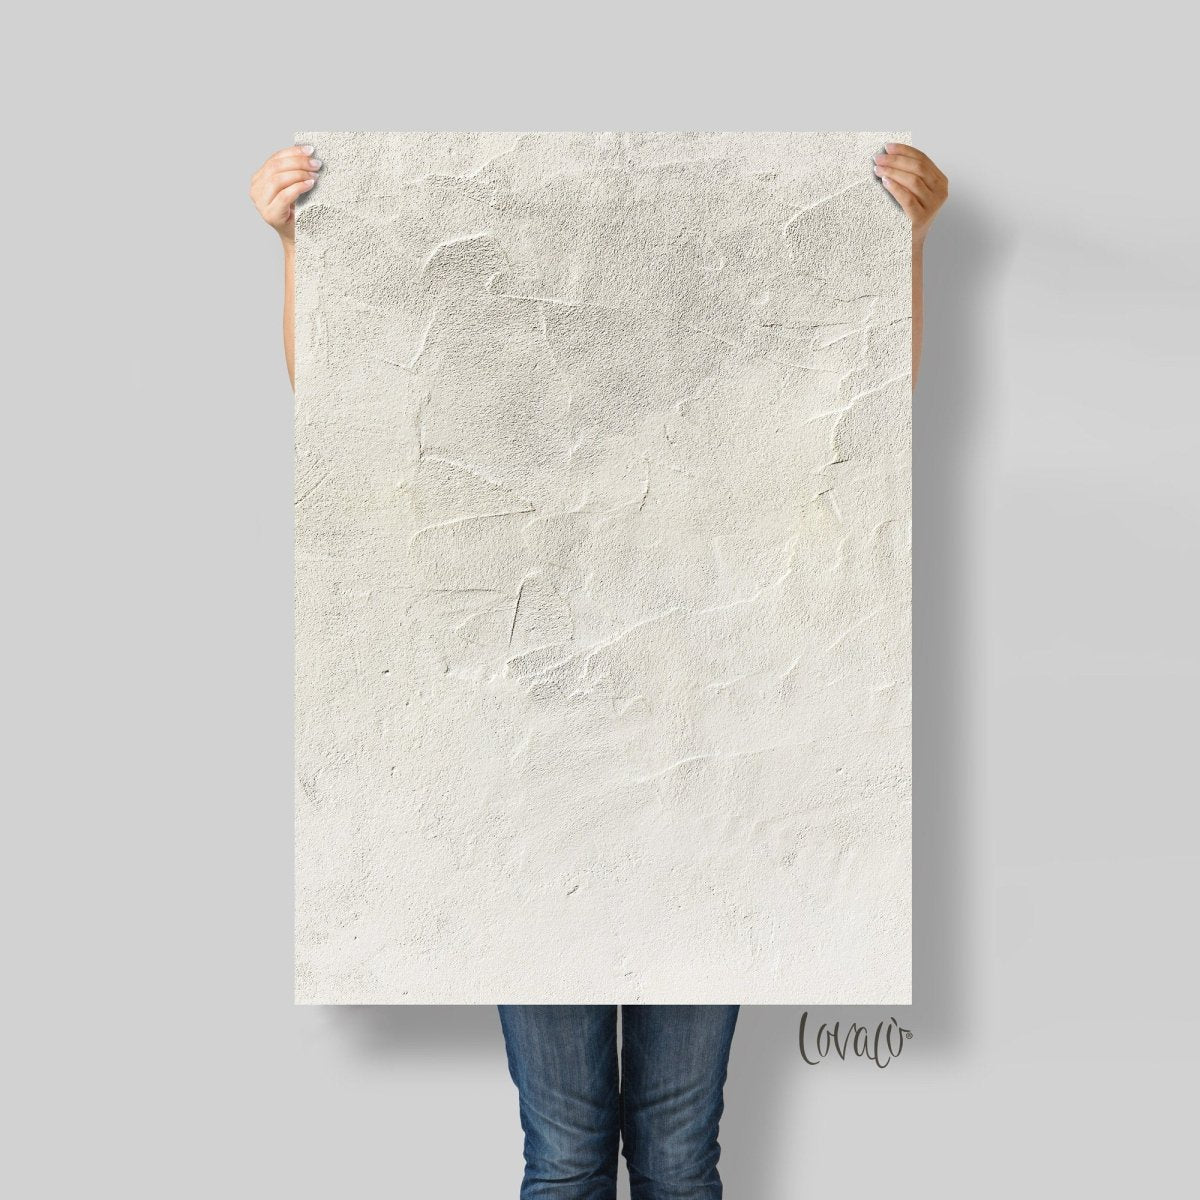 Old stucco wall Vinyl Photography Backdrop for Product, Instagram, Flat lay & Food Photography - Lov2049 - Lovalù